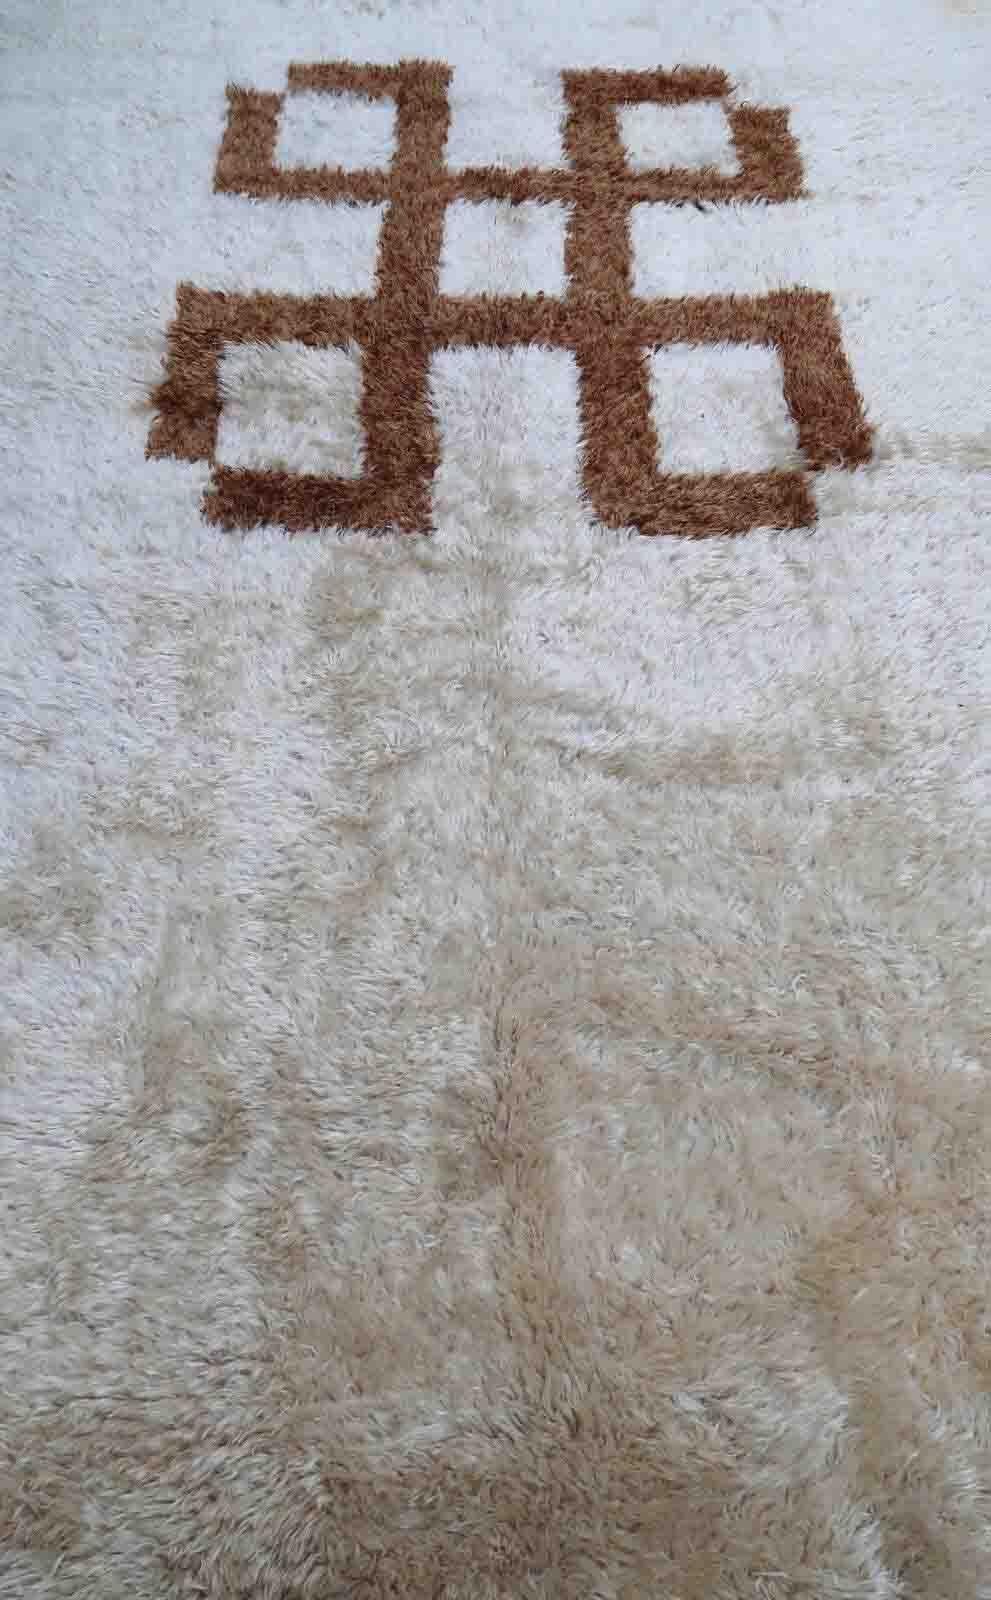 Handmade vintage rug from Madagascar in white and brown colors. The rug is from the end of 20th century in original good condition.

-condition: original good,

-circa: 1970s,

-size: 6.5' x 11.3' (200cm x 345cm),

-material: